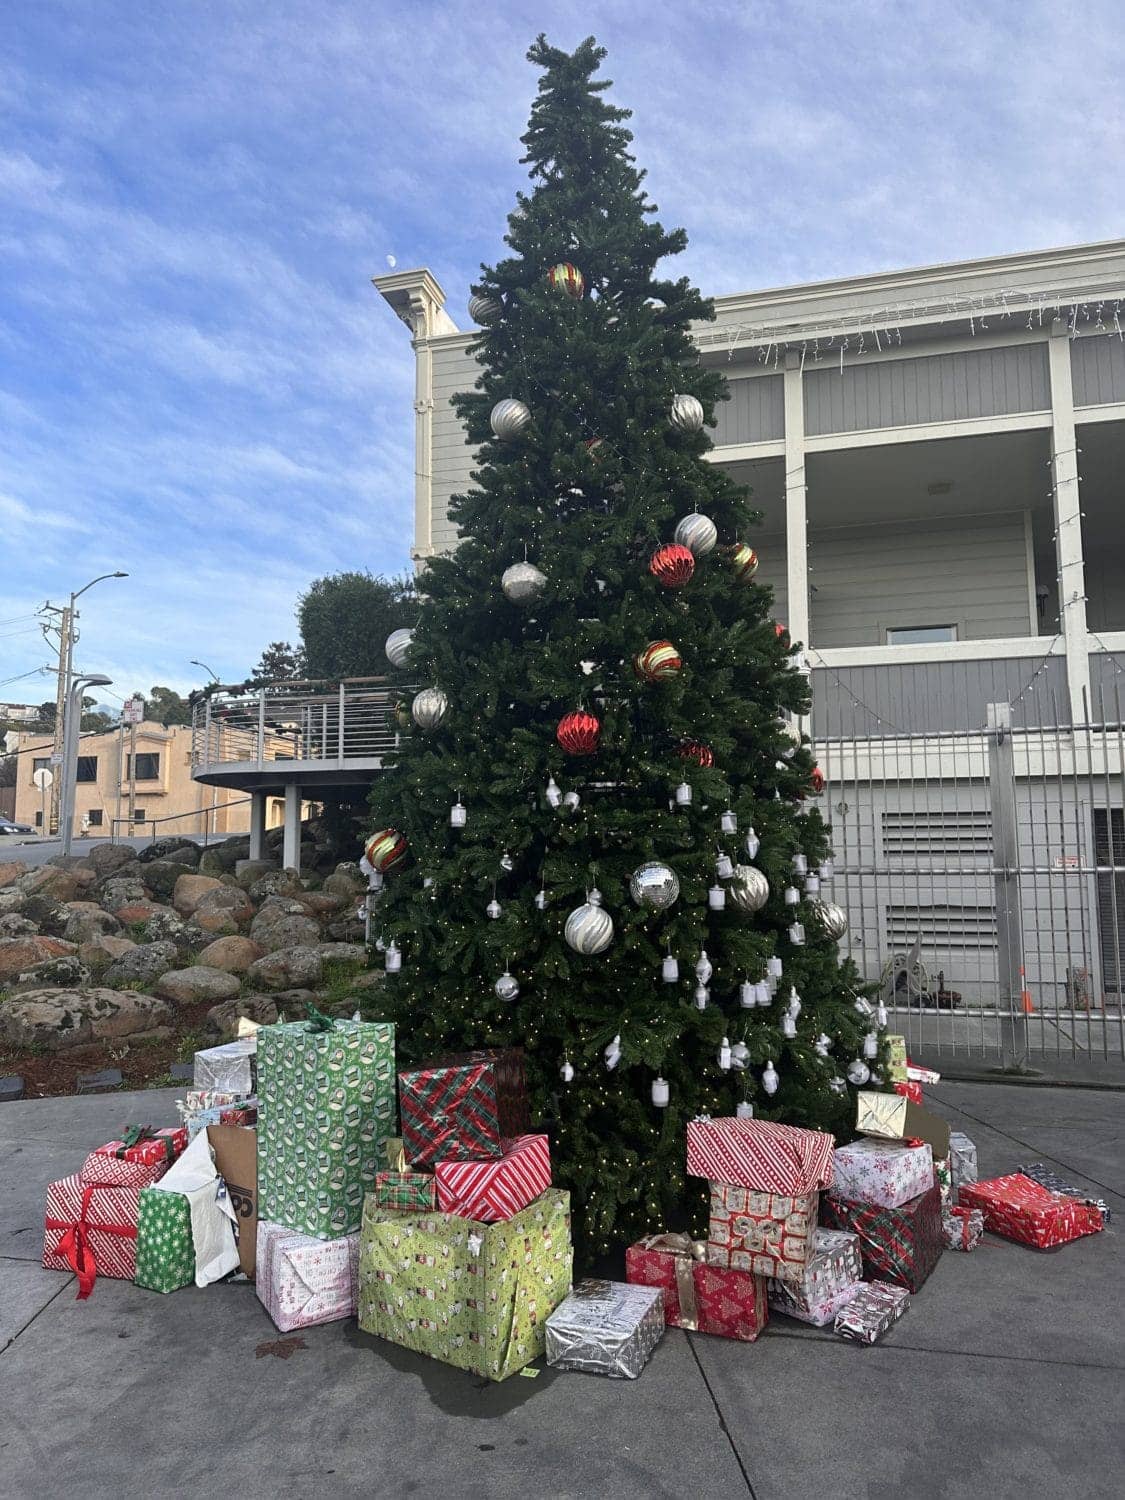 Winter-Wonderland-decorated-tree-outside-Ruth-Williams-Opera-House-121623-by-Kevin-Epps, Black Santa presides over Bayview Hunters Point family wonderland, Culture Currents Featured Local News & Views 